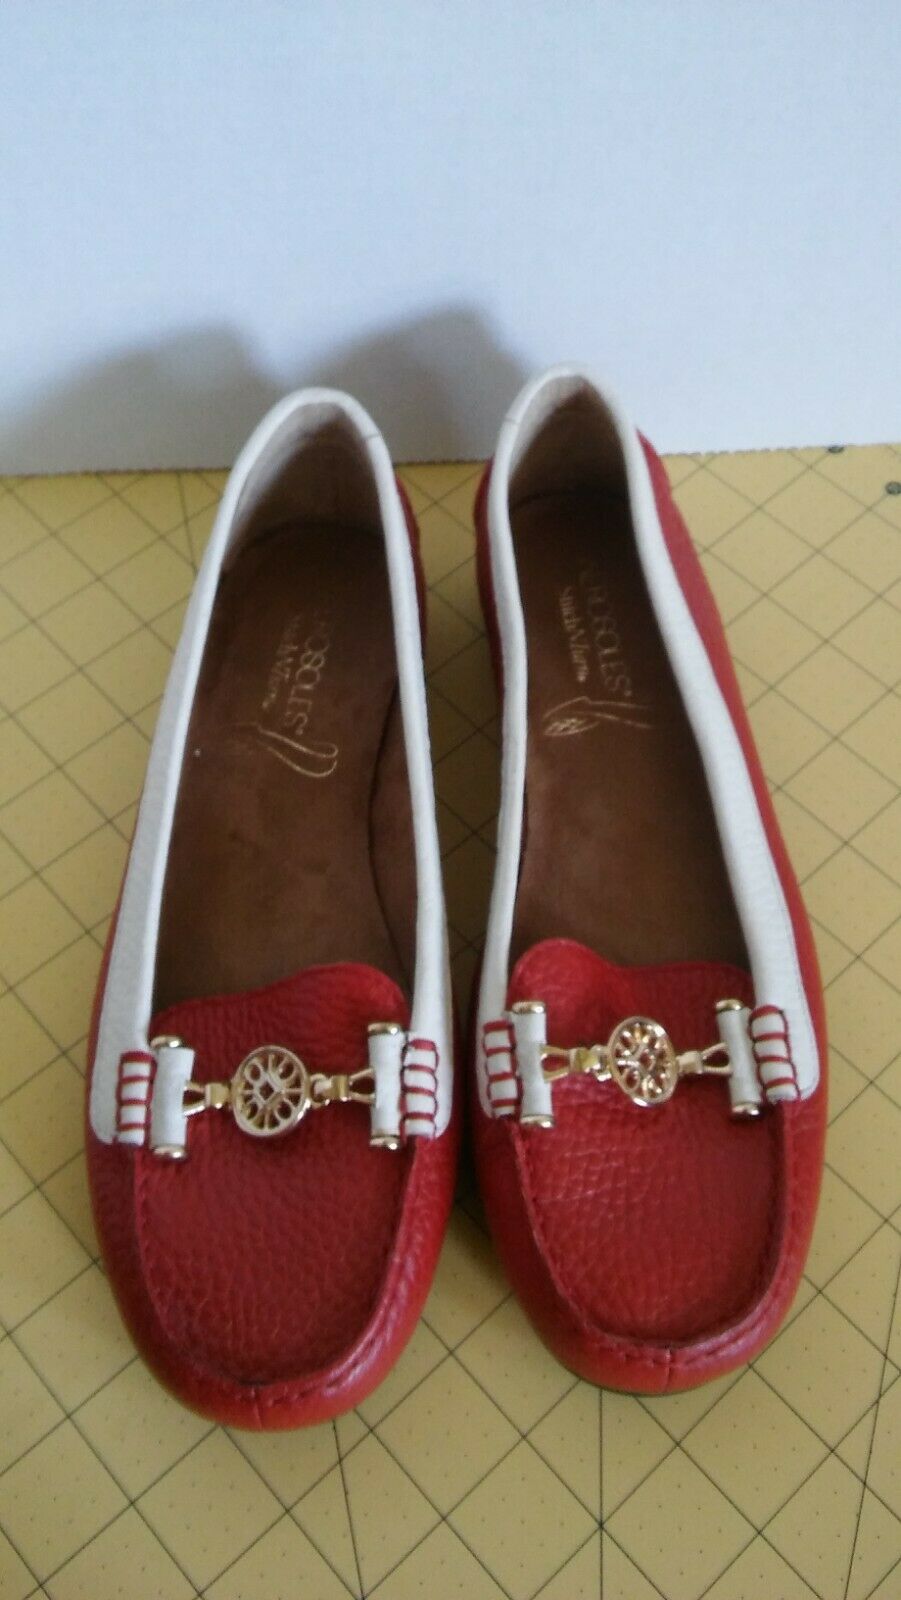 EUC Women's Aerosoles Nuwlywed Leather Loafer Shoes Red & White w Gold Buckle 9M